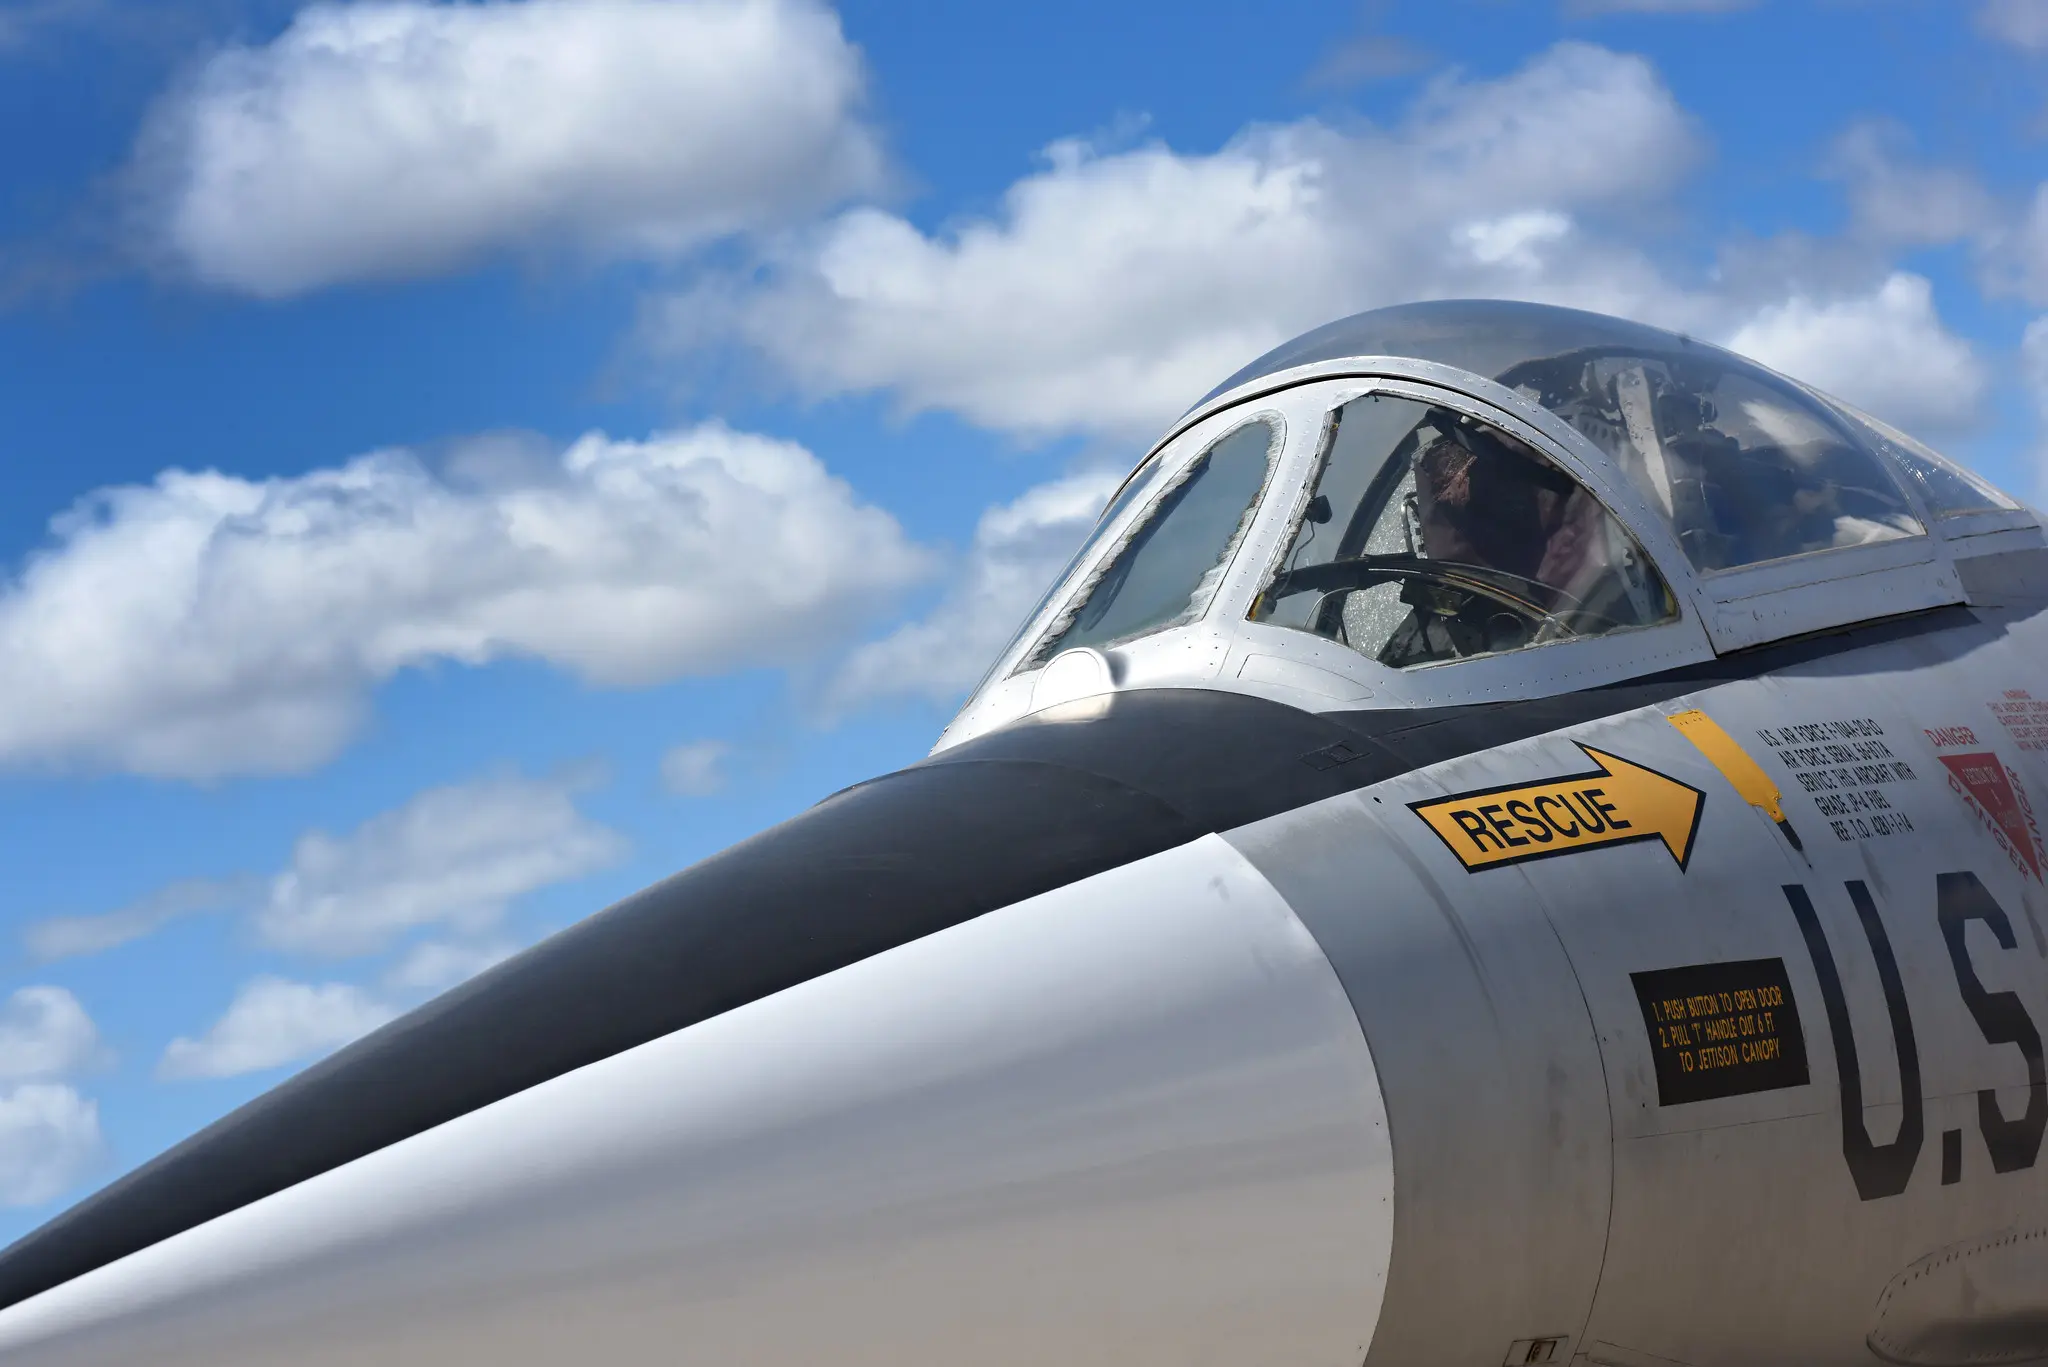 Close-up photograph of older fighter jet out on the runway on a clear, sunny day.